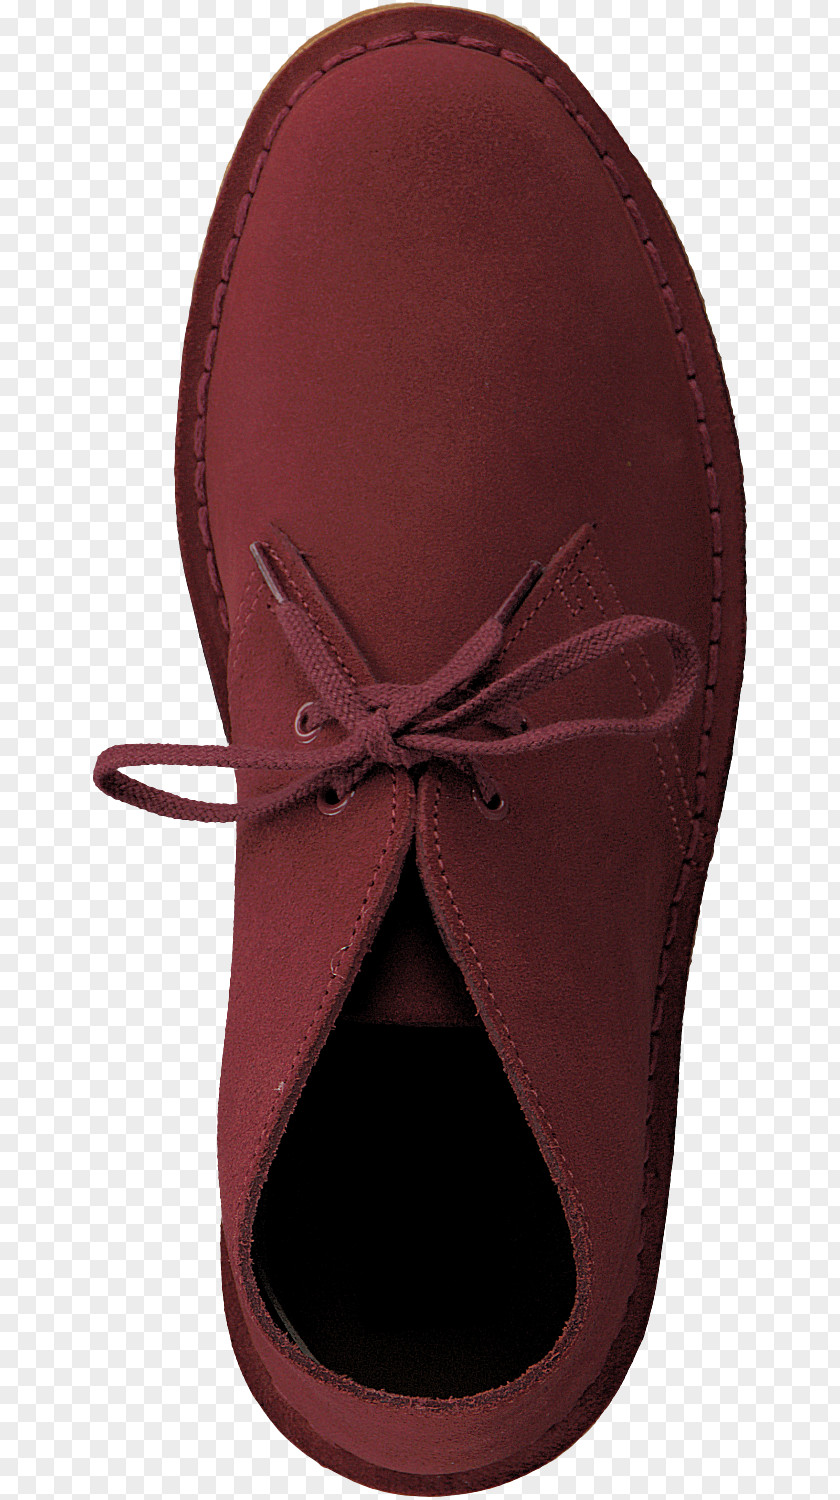 Ankle Boots Clarks Shoes For Women Suede Product Design Maroon Shoe PNG